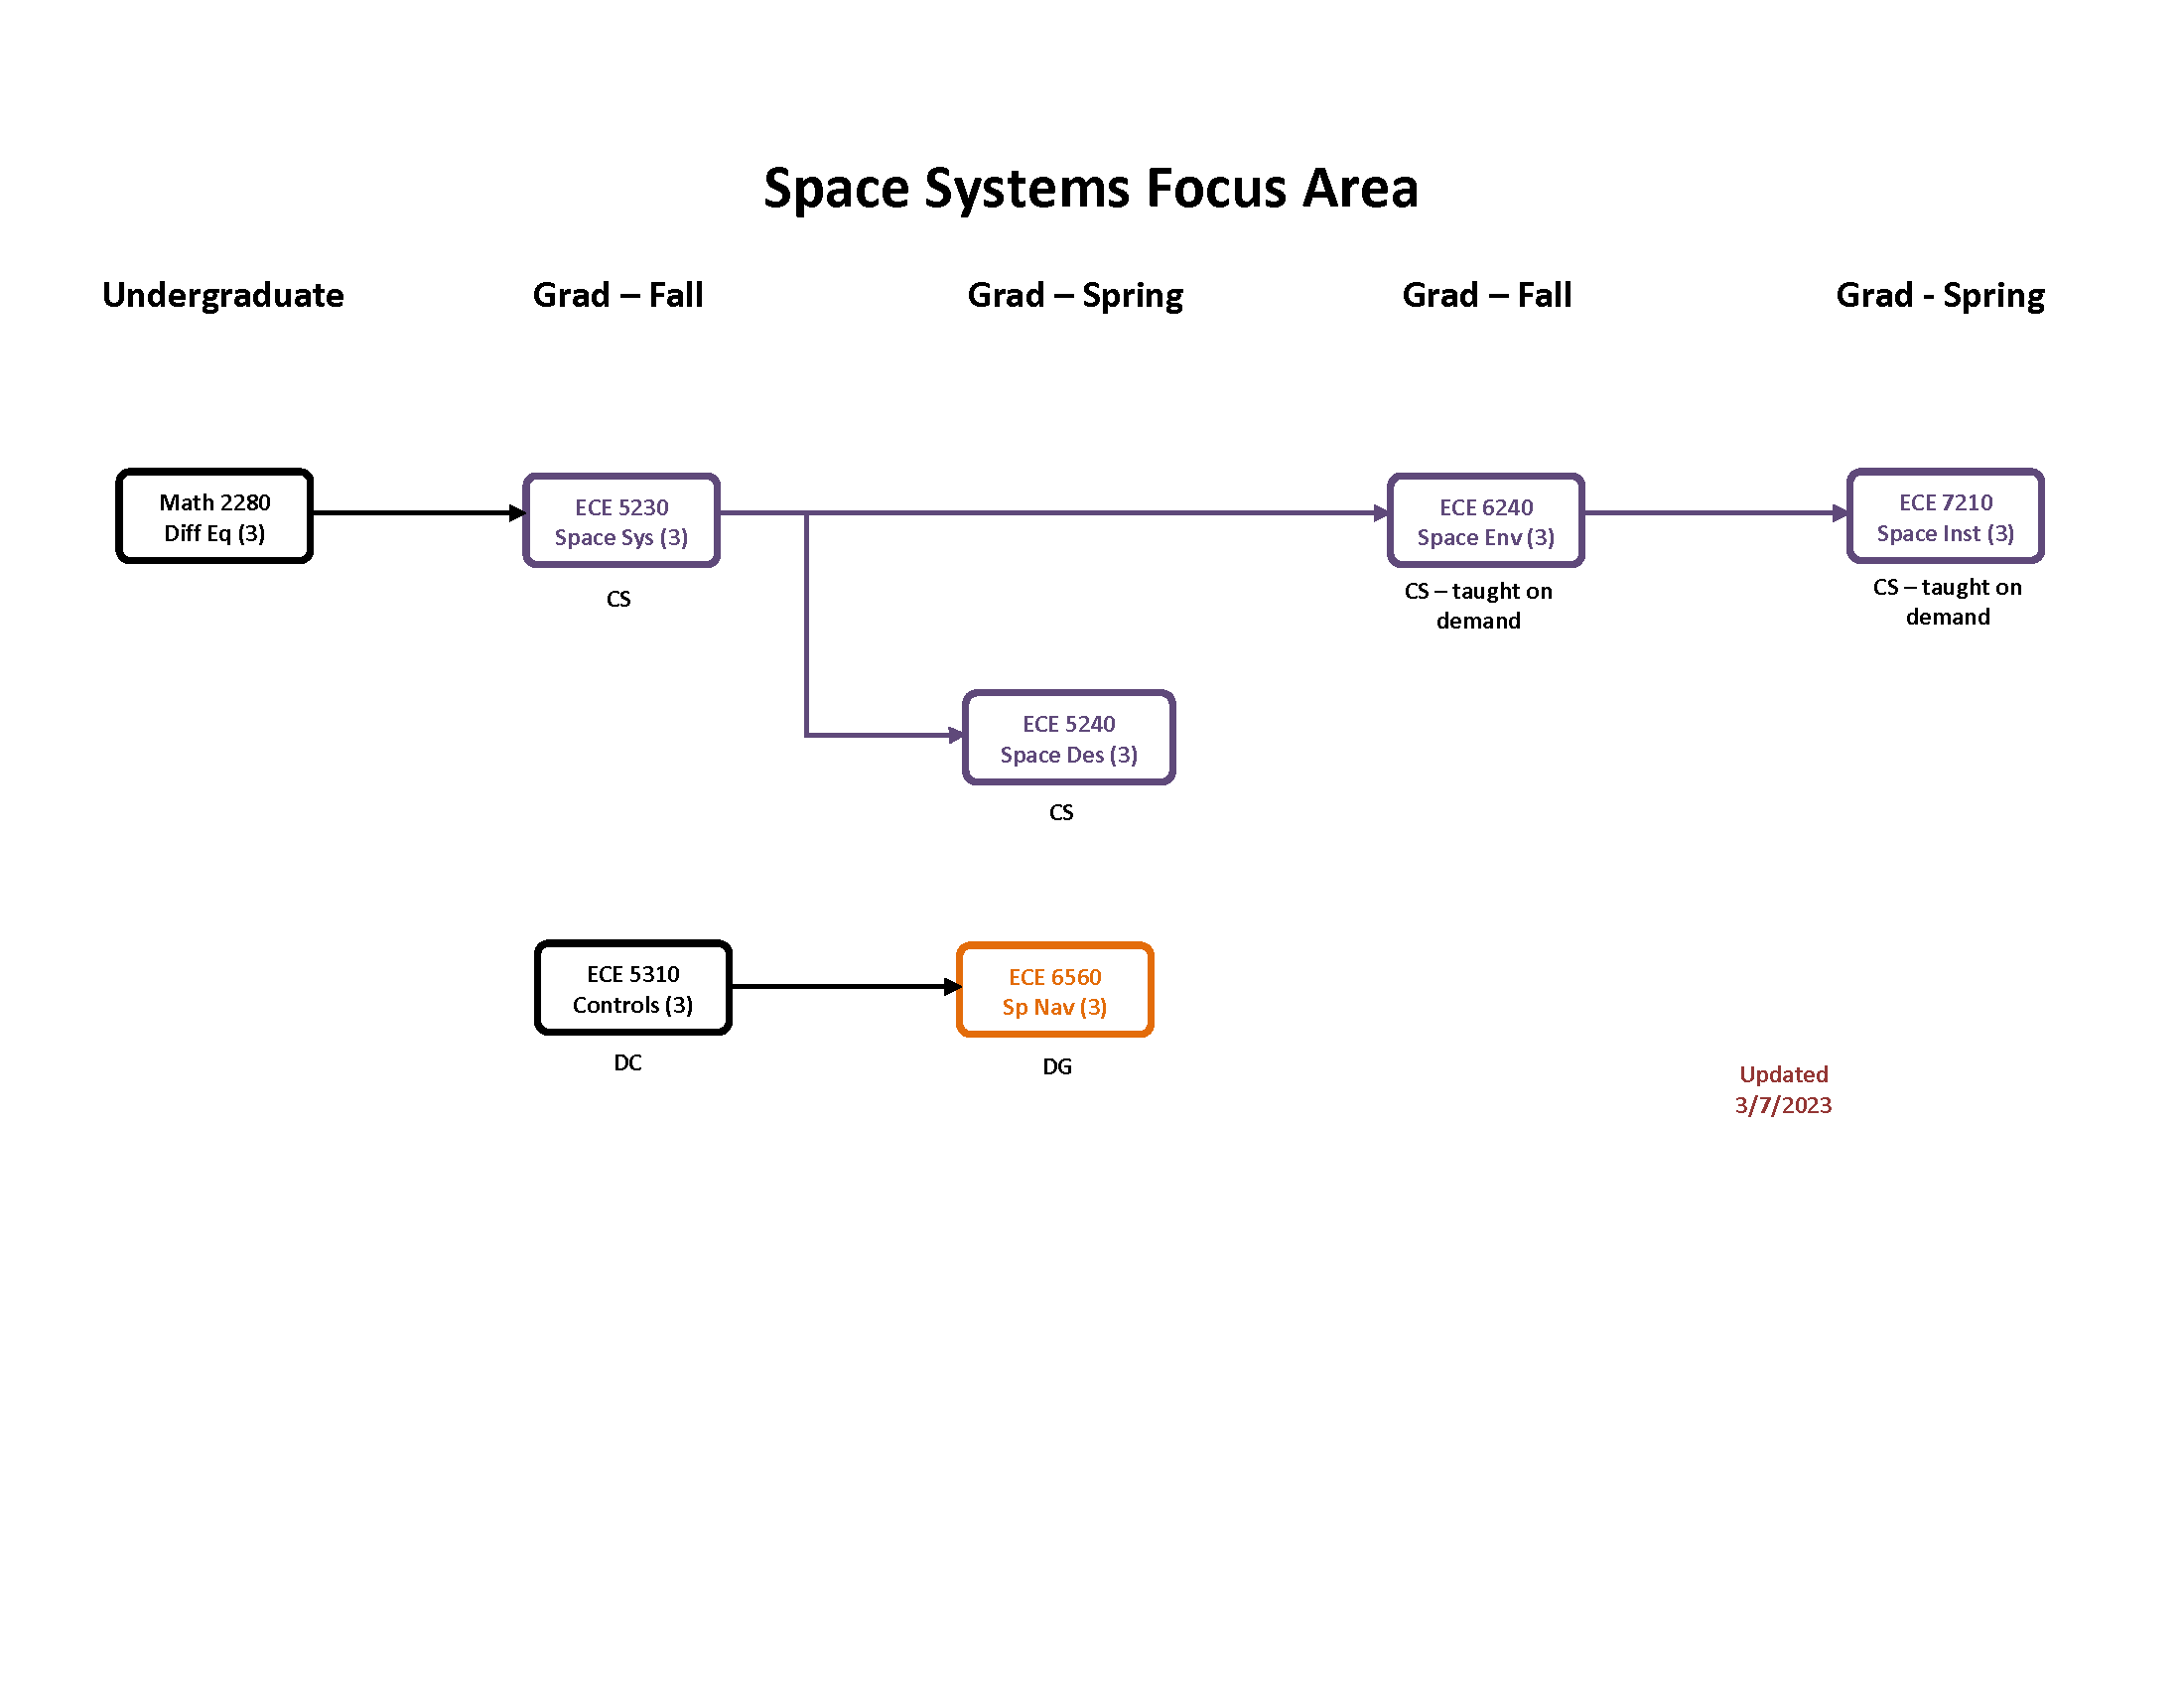 Space Systems Focus Area flow chart